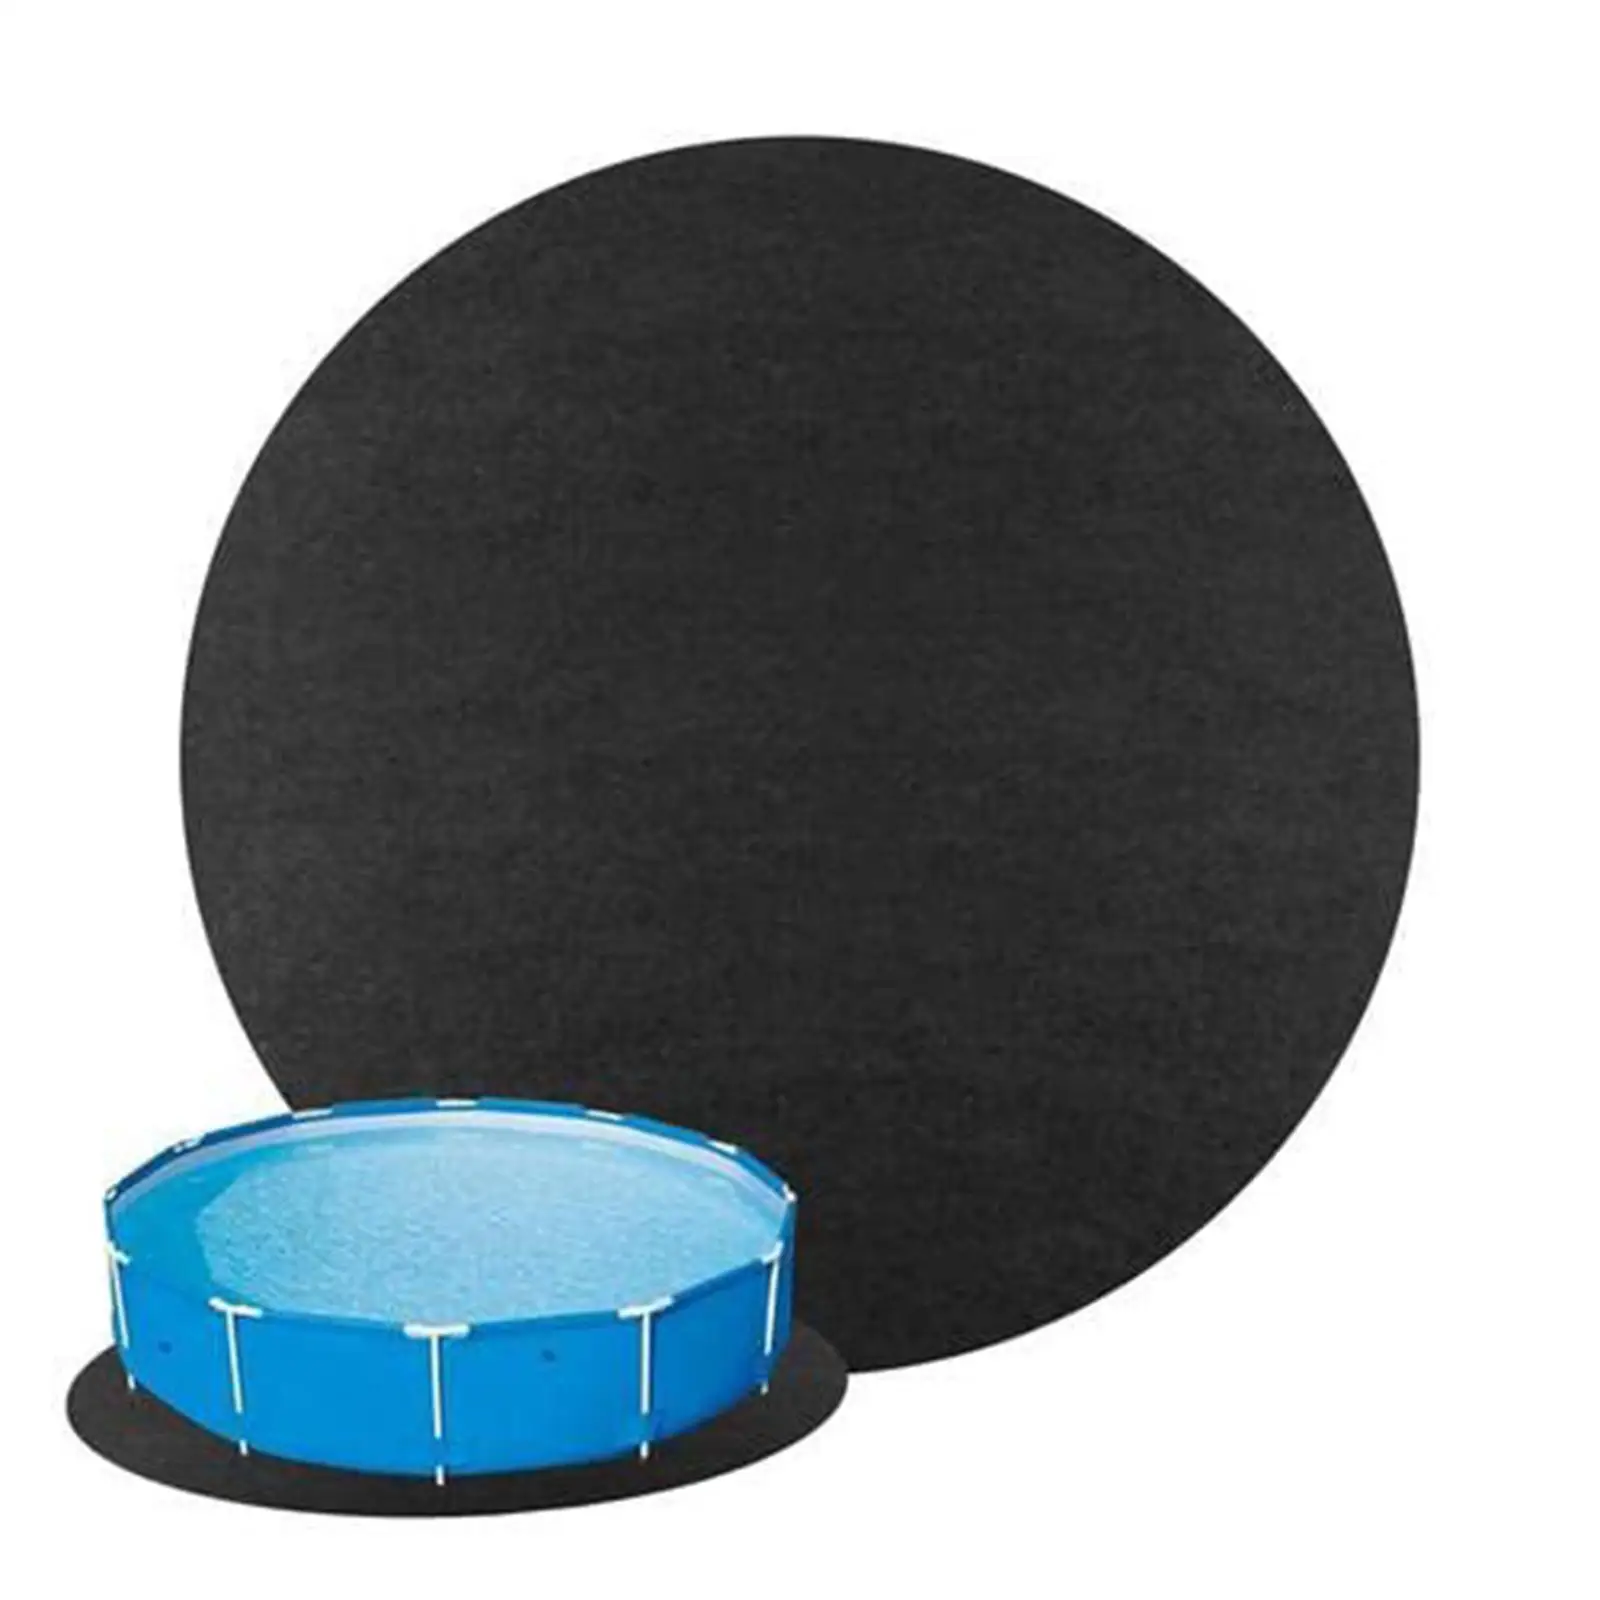 Pool Liner Pad, Pool Accessories Protect Your Pool Pool Liner Pads for above Ground Pool, for 4m Swimming pool Outdoor